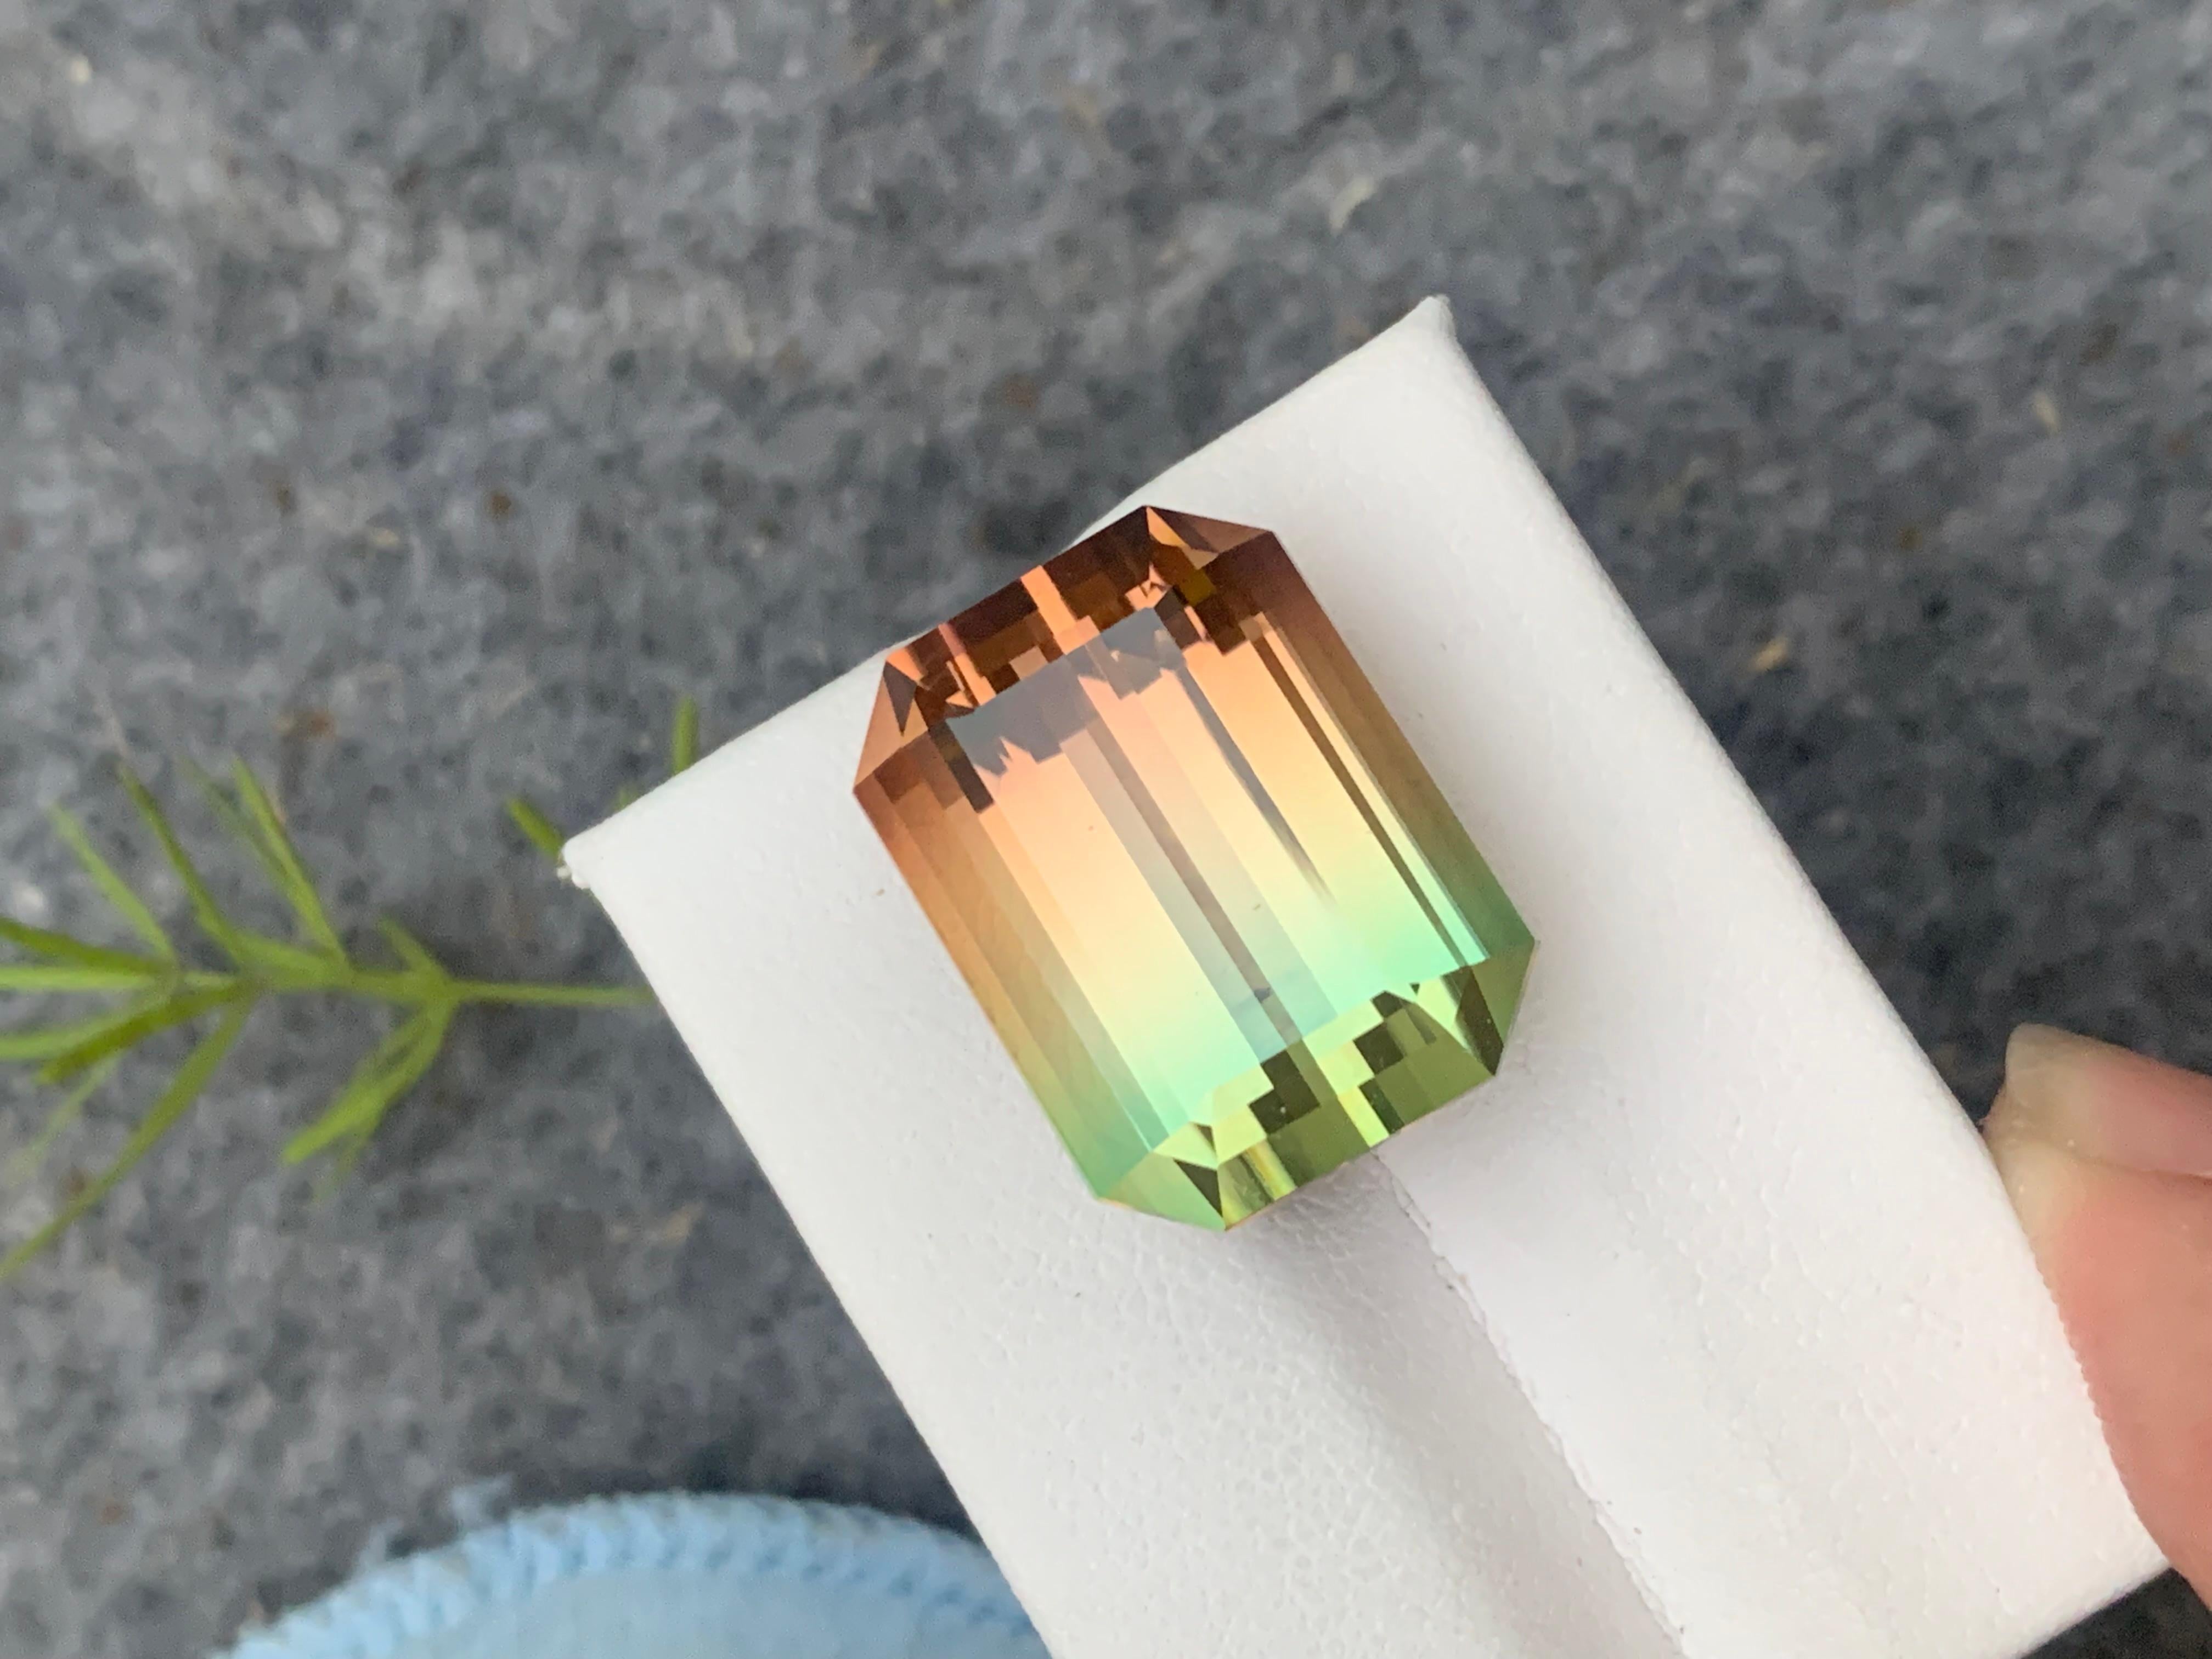 Bicolor Tourmaline 
Weight: 38.65 Carats
Dimension: 20x15.6x13.5 Mm
Origin: Africa
Color: Green & Orange
Shape: Emerald
Quality: AAA
.
Bicolor tourmaline is connected to the heart chakra, which makes it good for cleansing and removing any blockages.